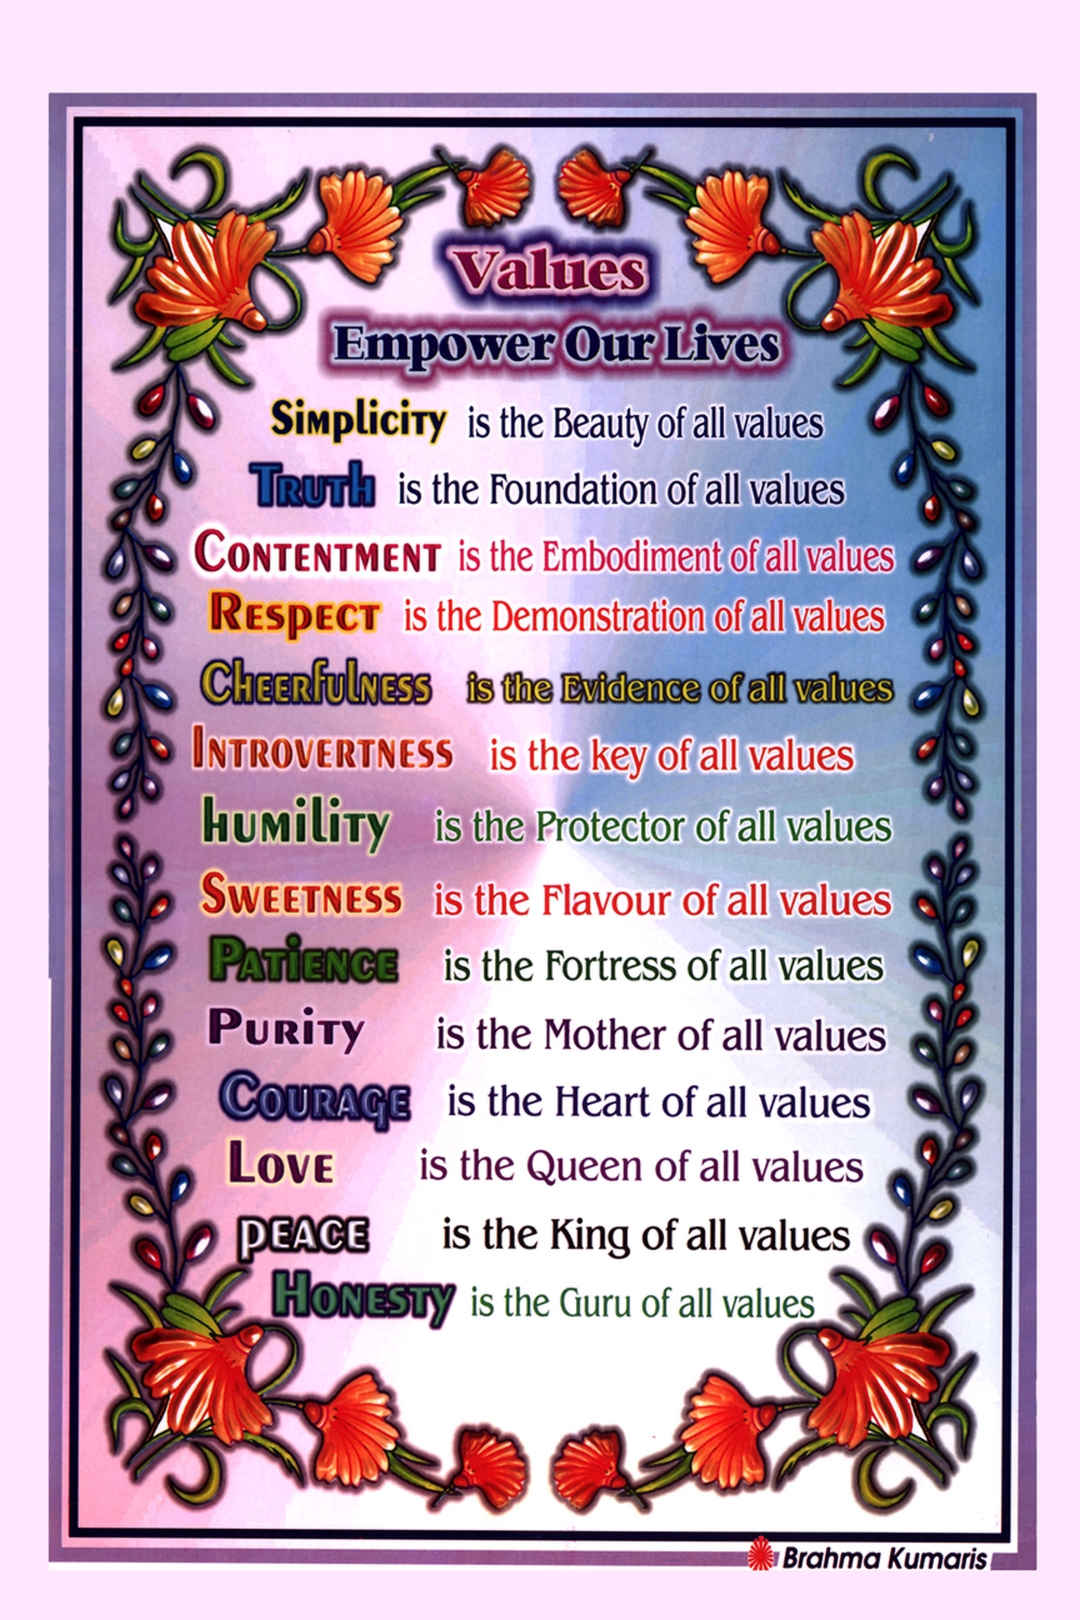 Values empower our lives